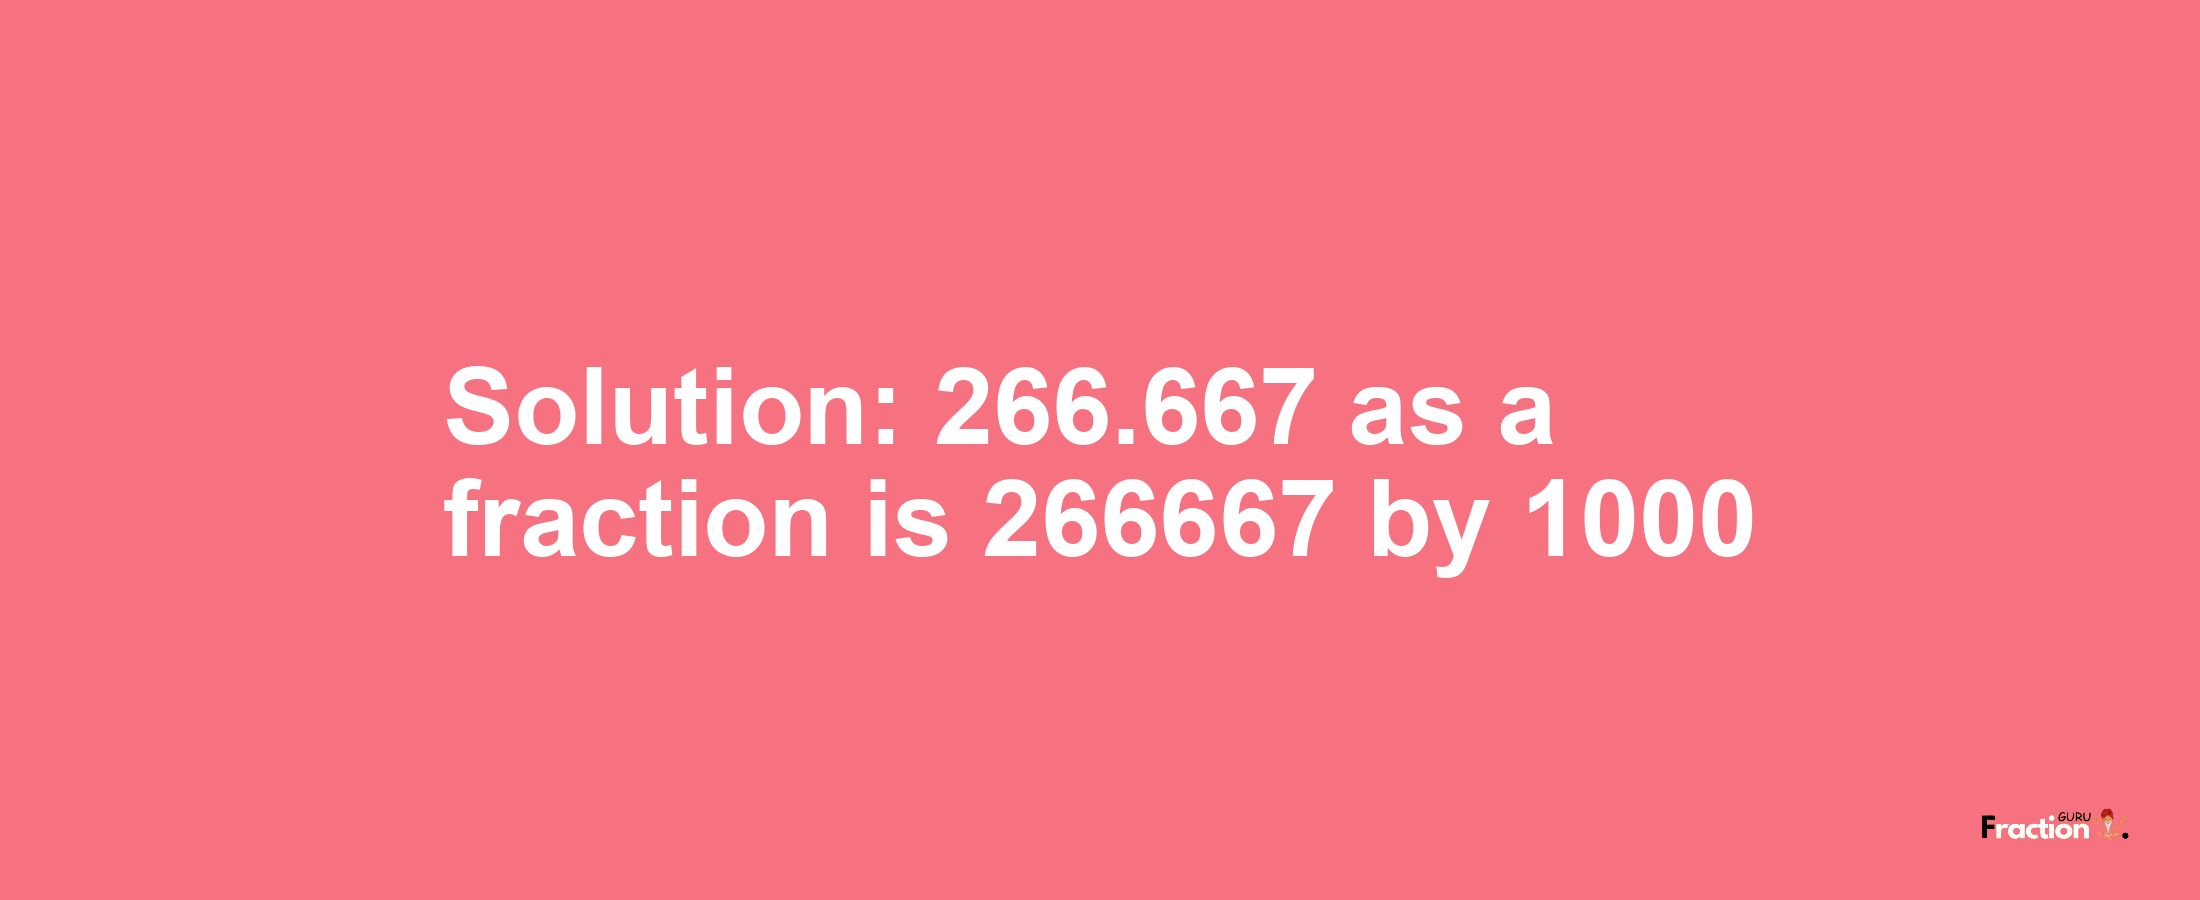 Solution:266.667 as a fraction is 266667/1000